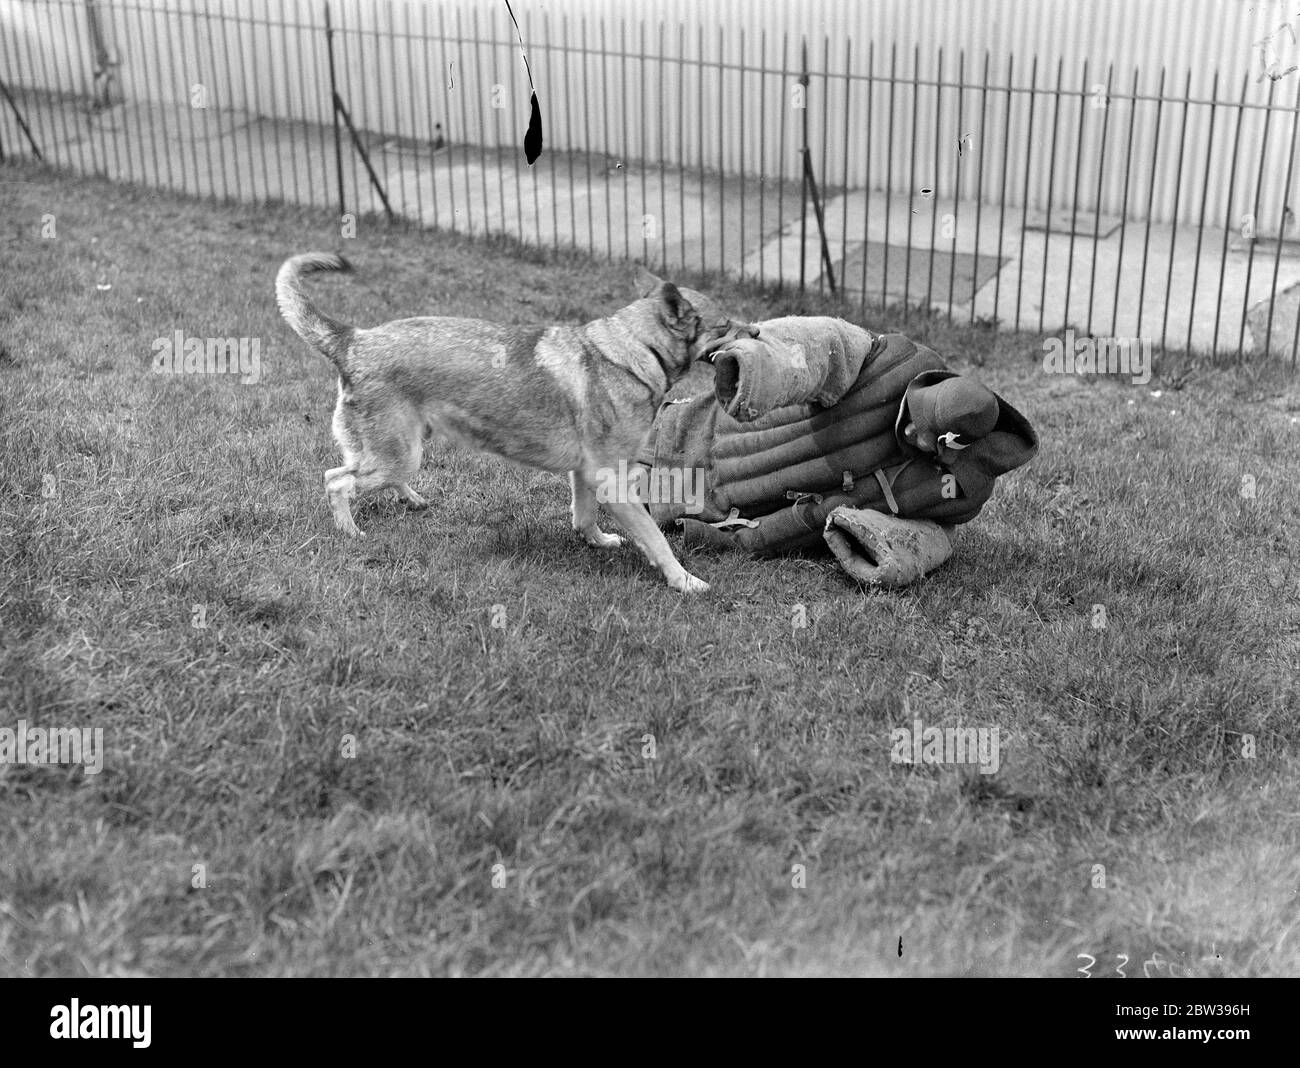 Alsatian trials at the Crystal Palce . The Alsatian Dog Trials opened at the Crystal Palace , London . One feature of the displays was a demonstration of an Alsatian dog attacking a woman who wears a special padded suit . Photo shows ; An Alsatian attacking a woman during the demonstration at the Crystal Palace , London . 17 April 1934 . 30s, 30's, 1930s, 1930's, thirties, nineteen thirties Stock Photo